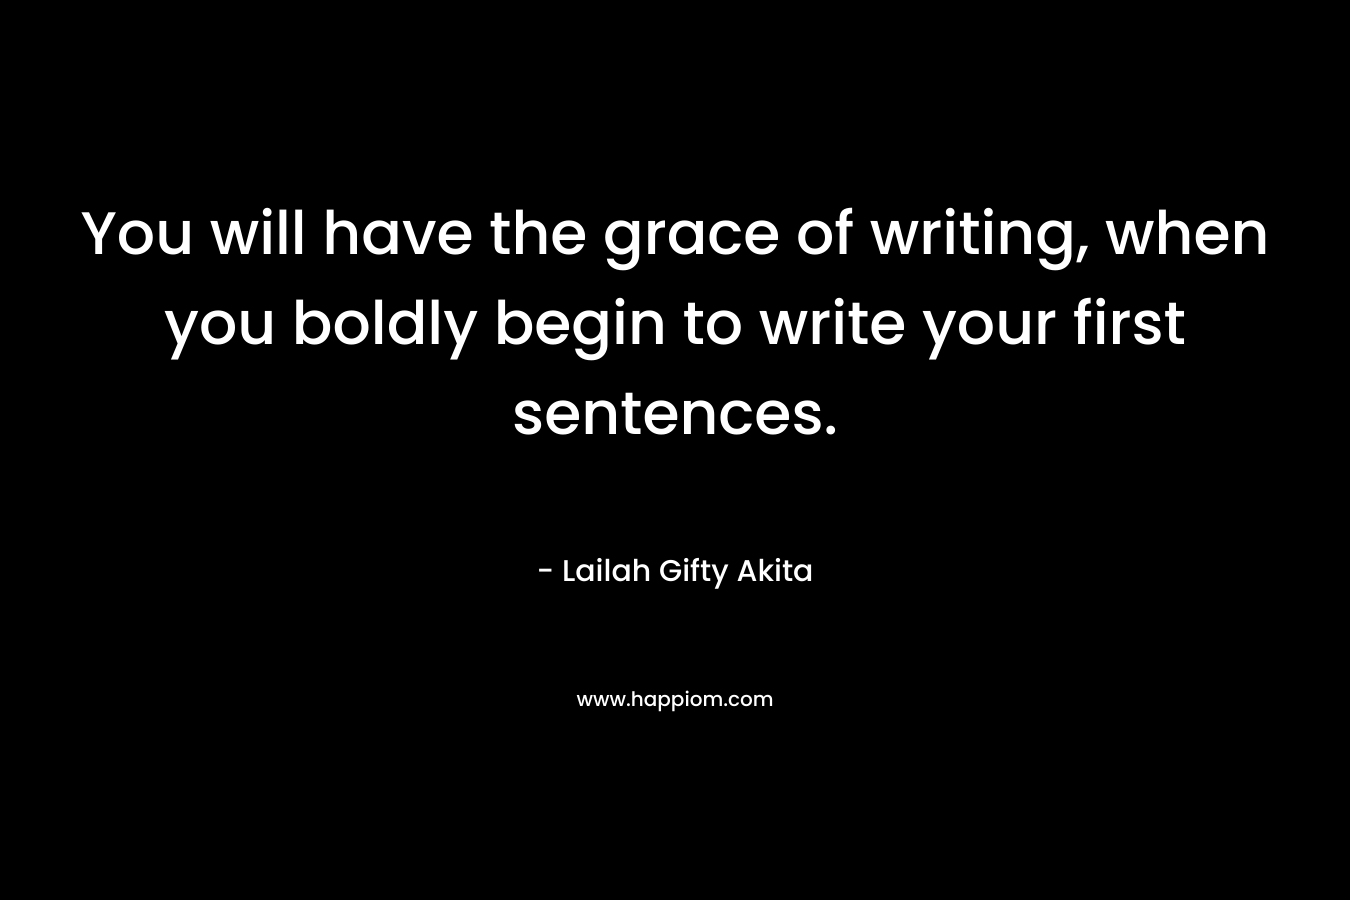 You will have the grace of writing, when you boldly begin to write your first sentences.